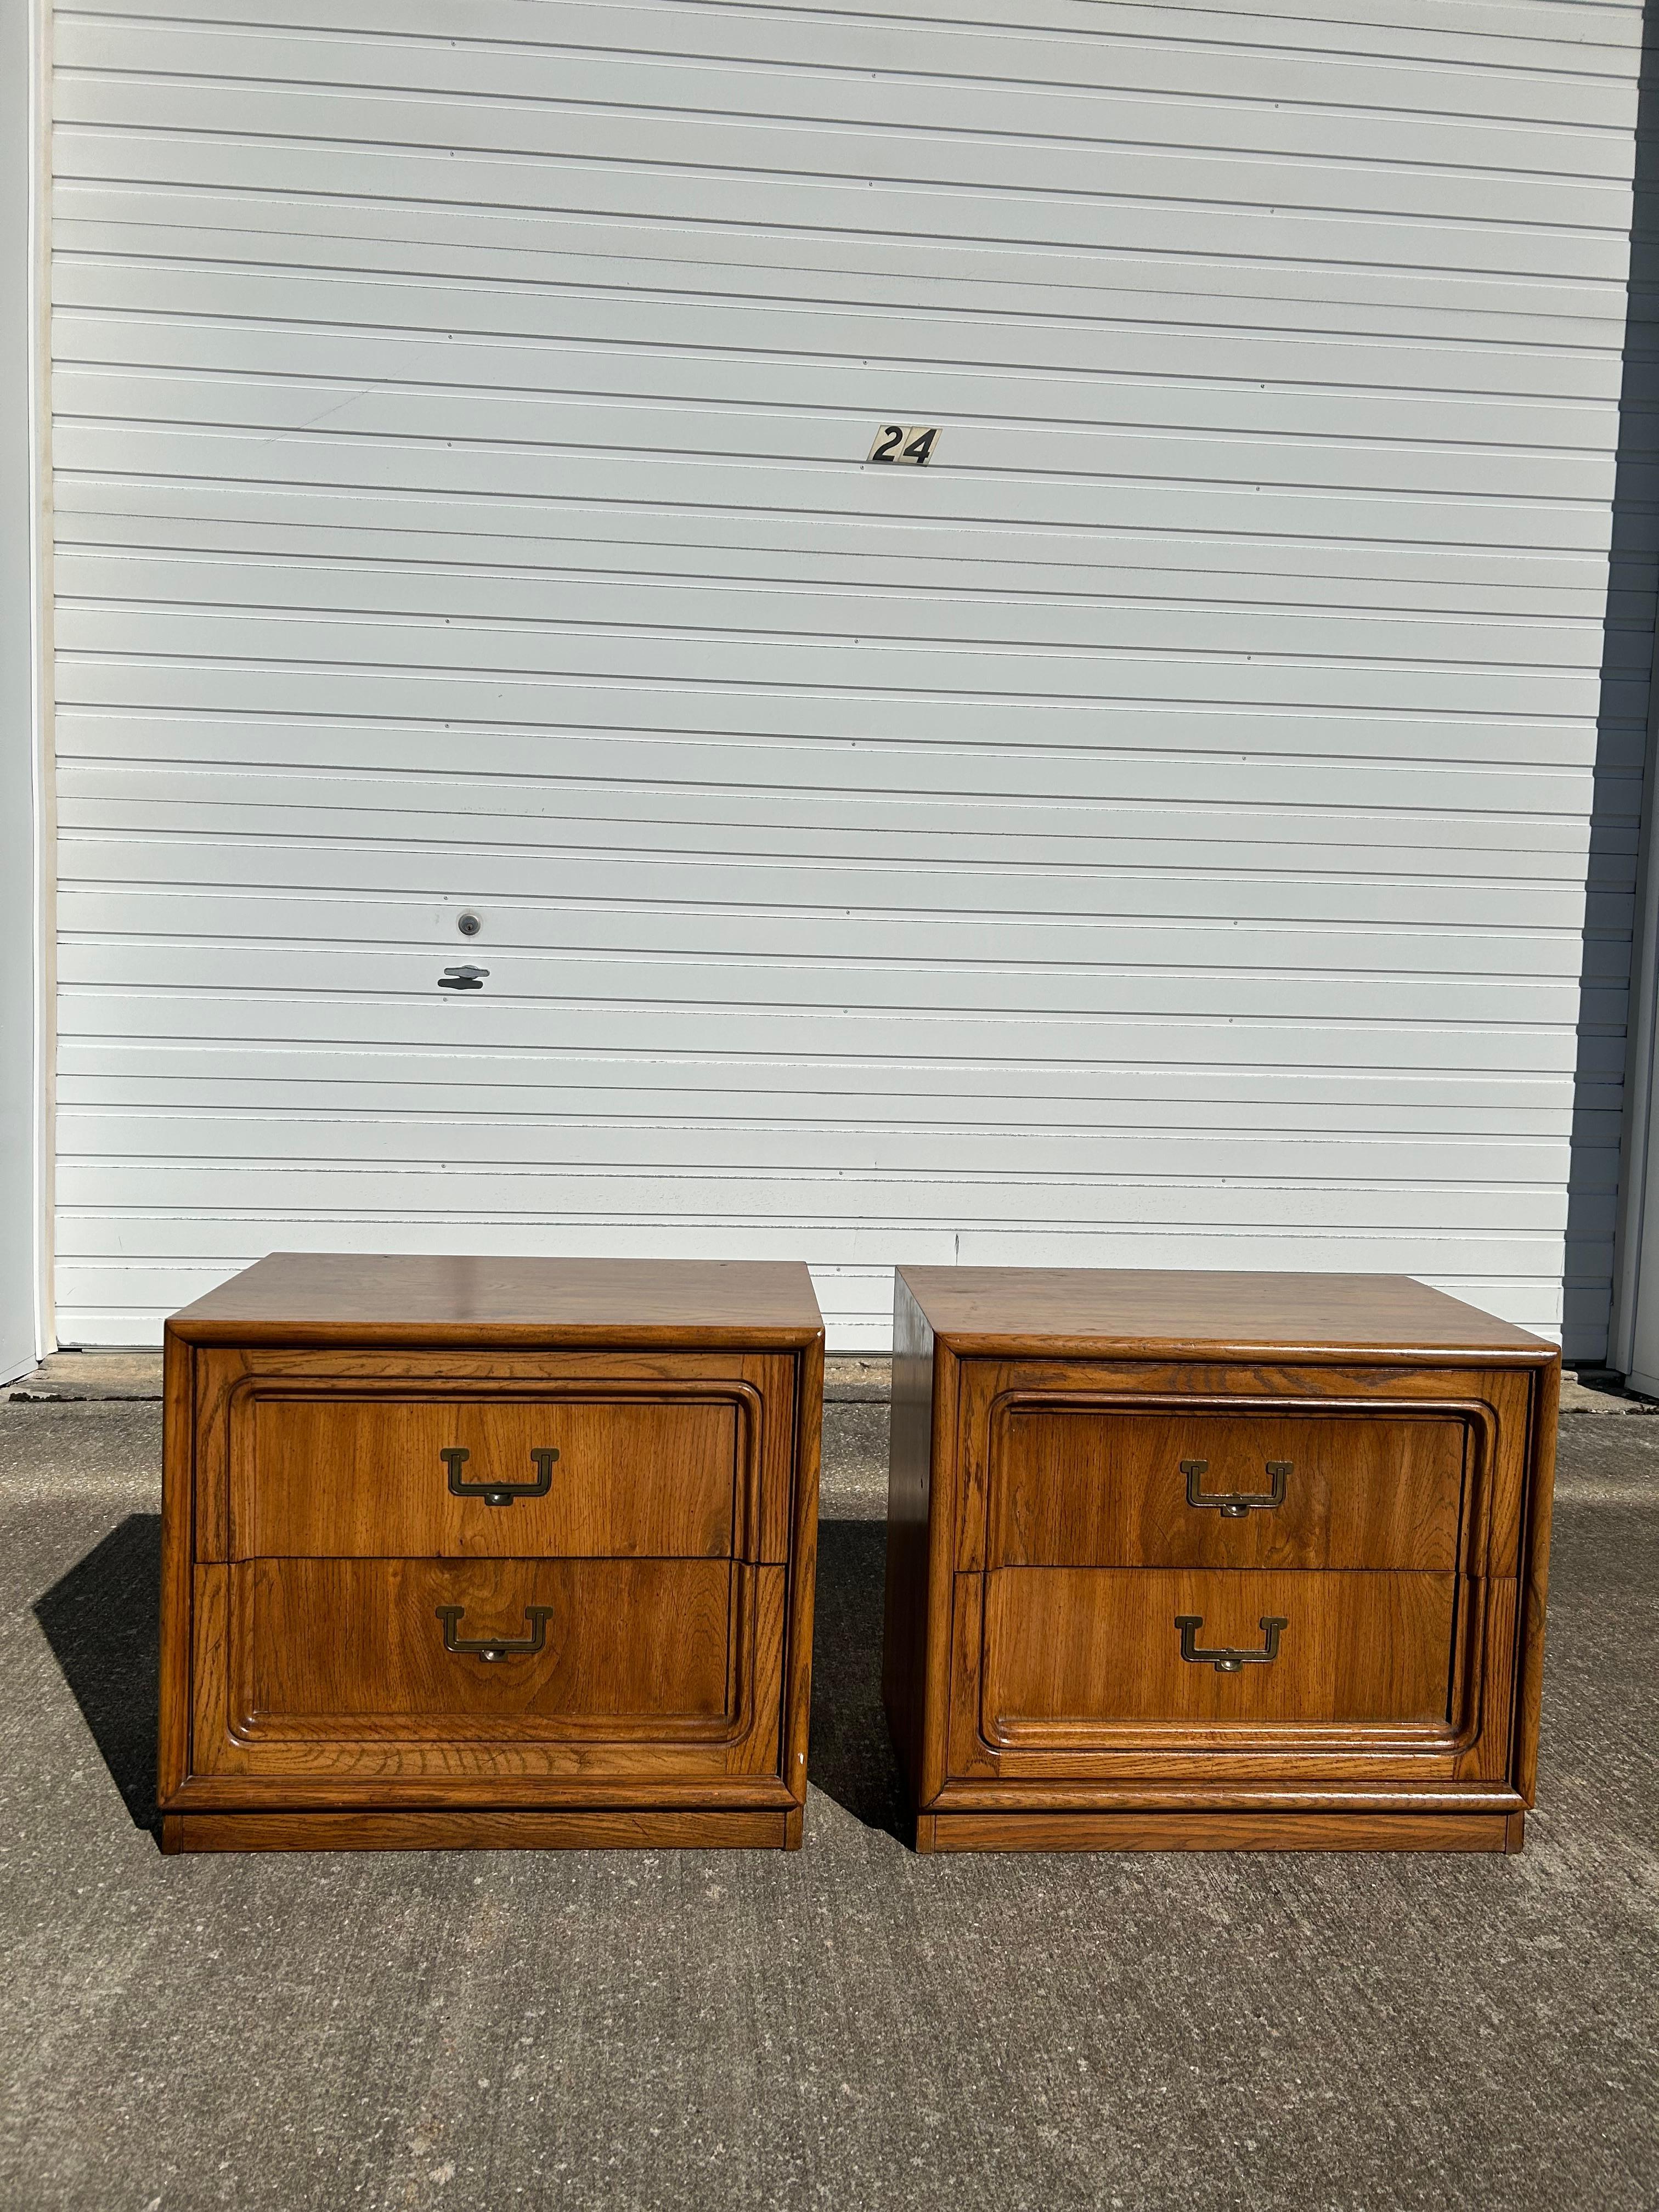 Pair of Thomasville End tables or nightstands. It is hard finding a pair of end tables that aren't from a big box store!! Claim these for your bedroom or guest bedroom. The nightstands have beautiful brass handles for 2 drawers on each. The oak wood